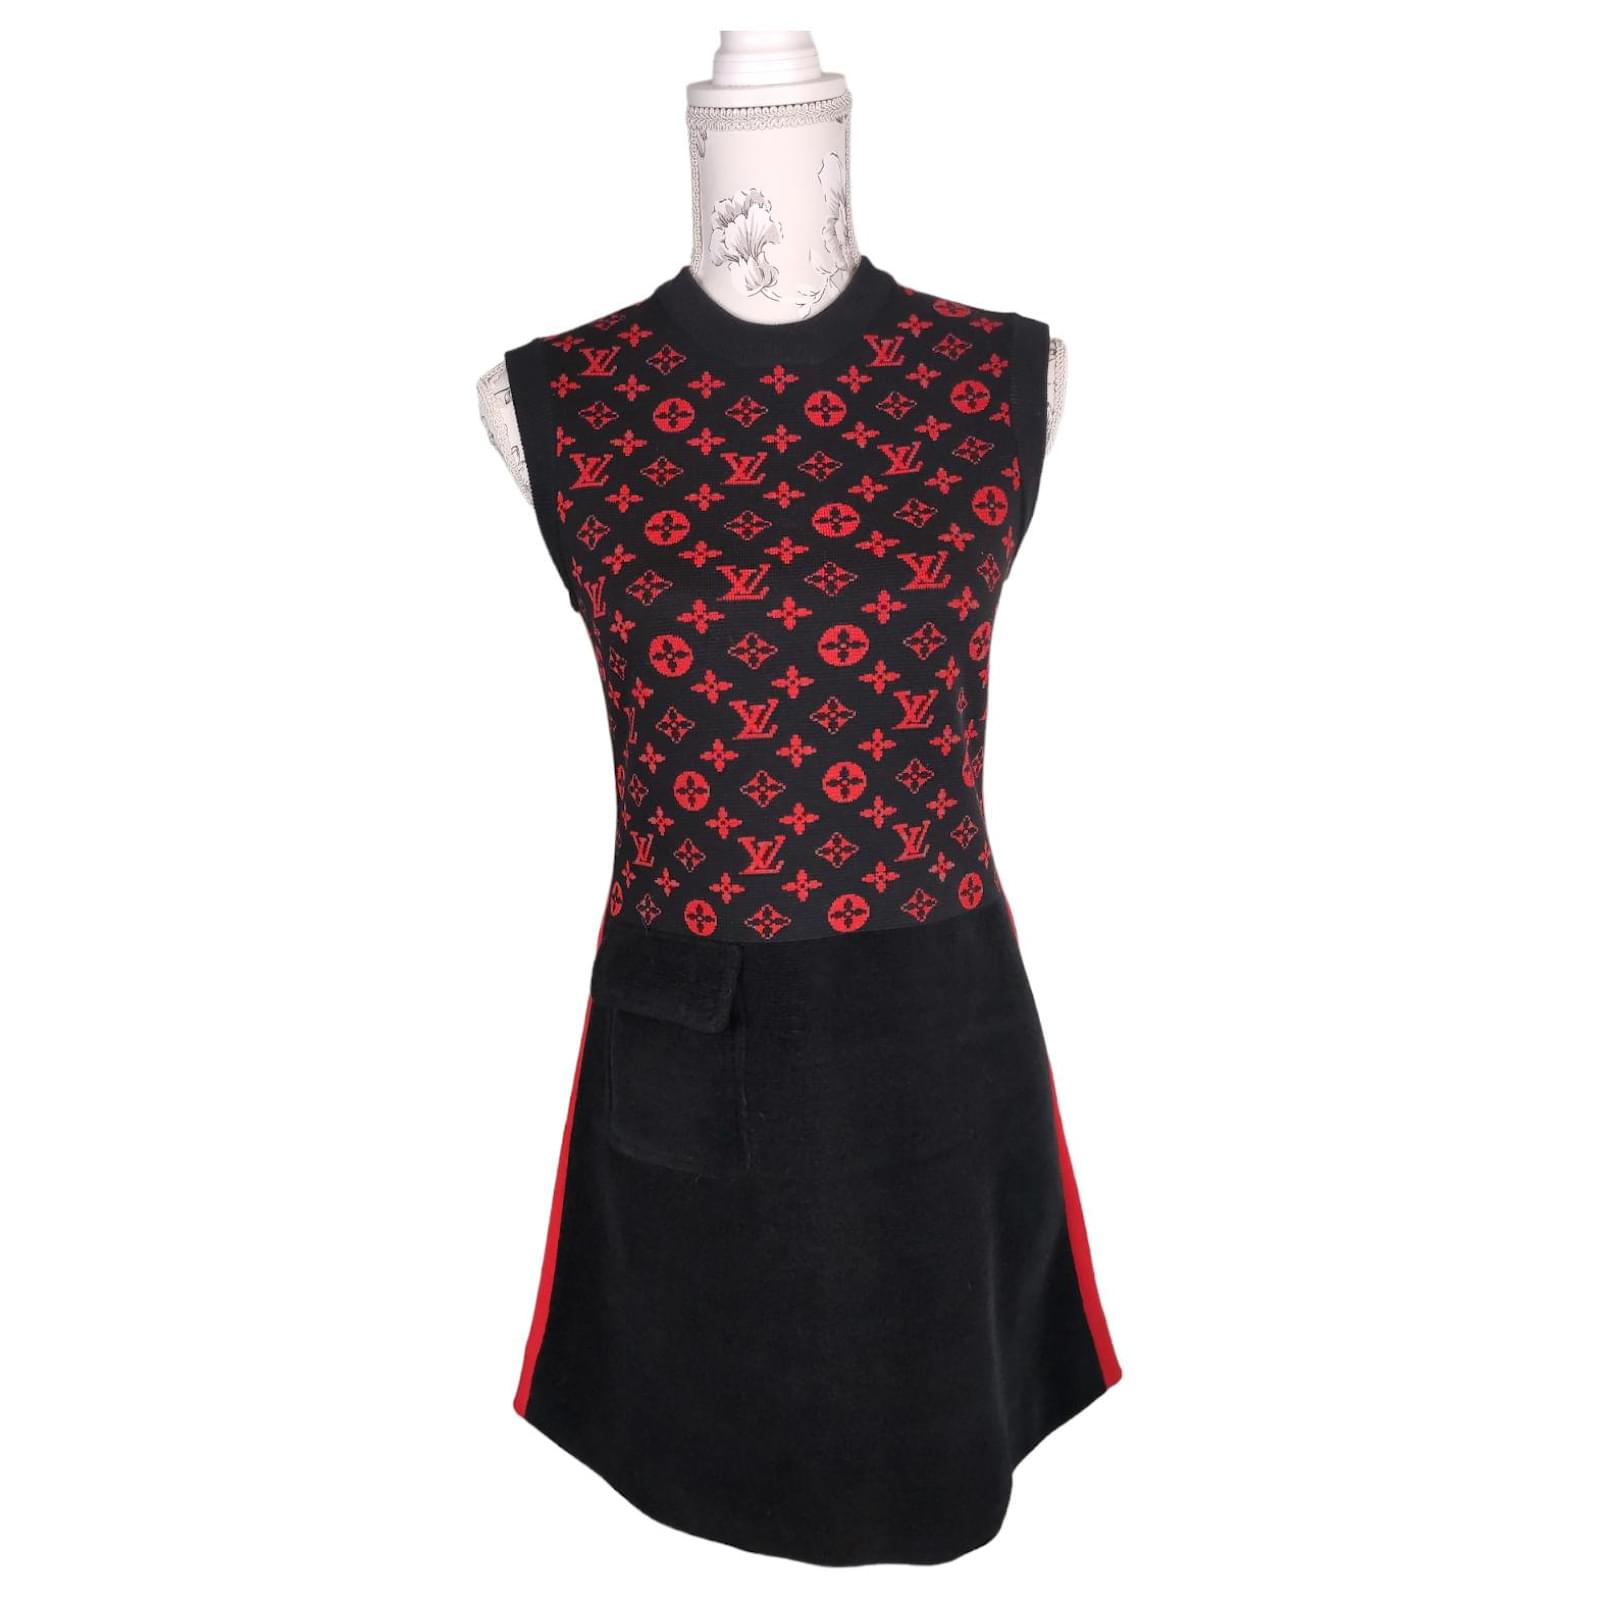 Two-tone black and red louis vuitton monogram dress Gold hardware